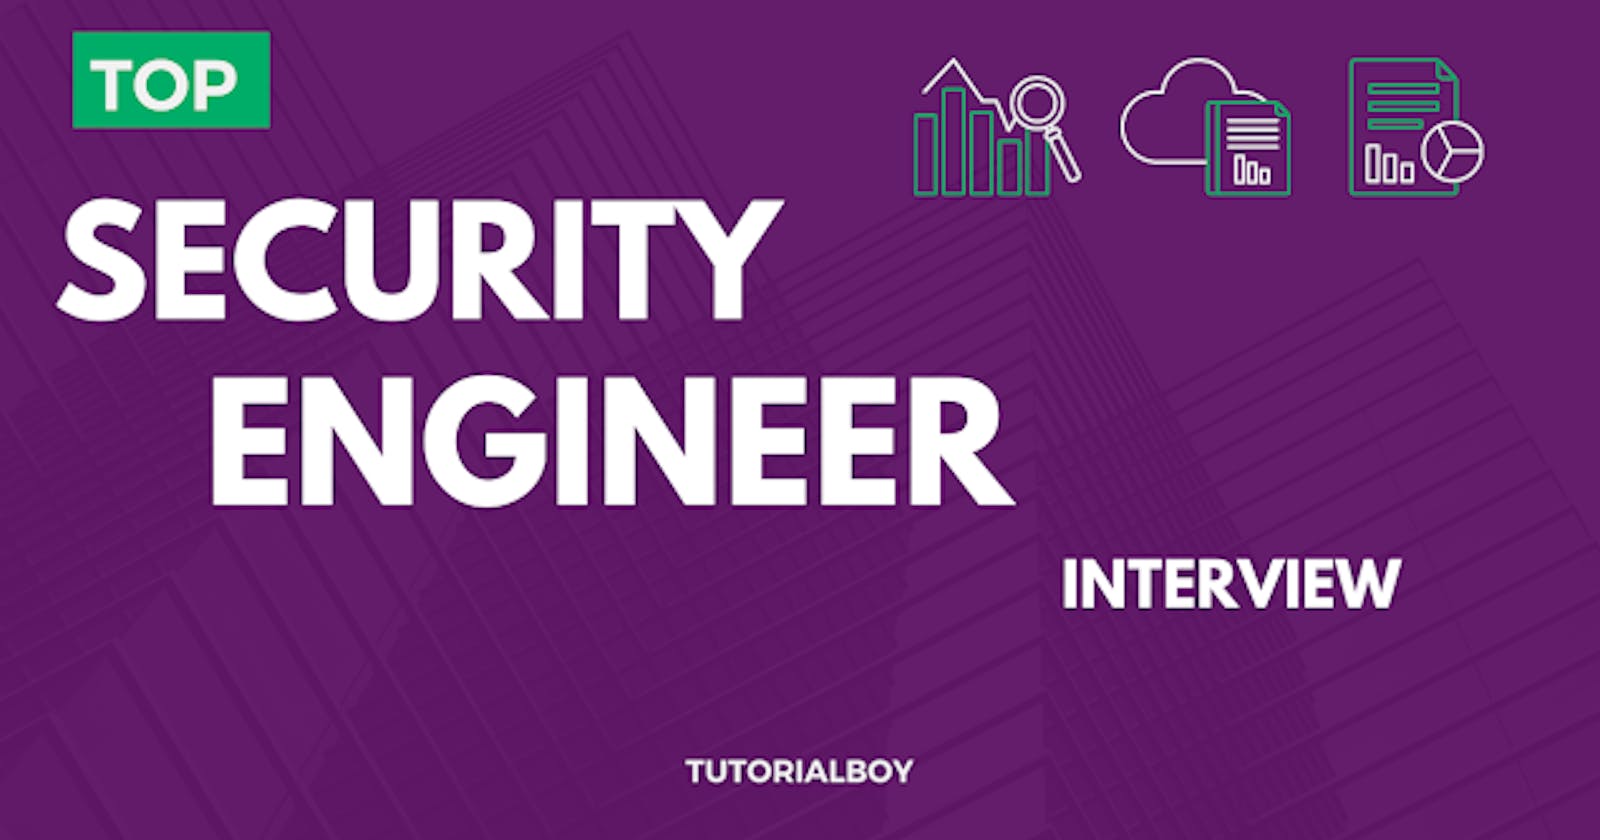 A Brief Summary of Primary Interview of Security Engineer